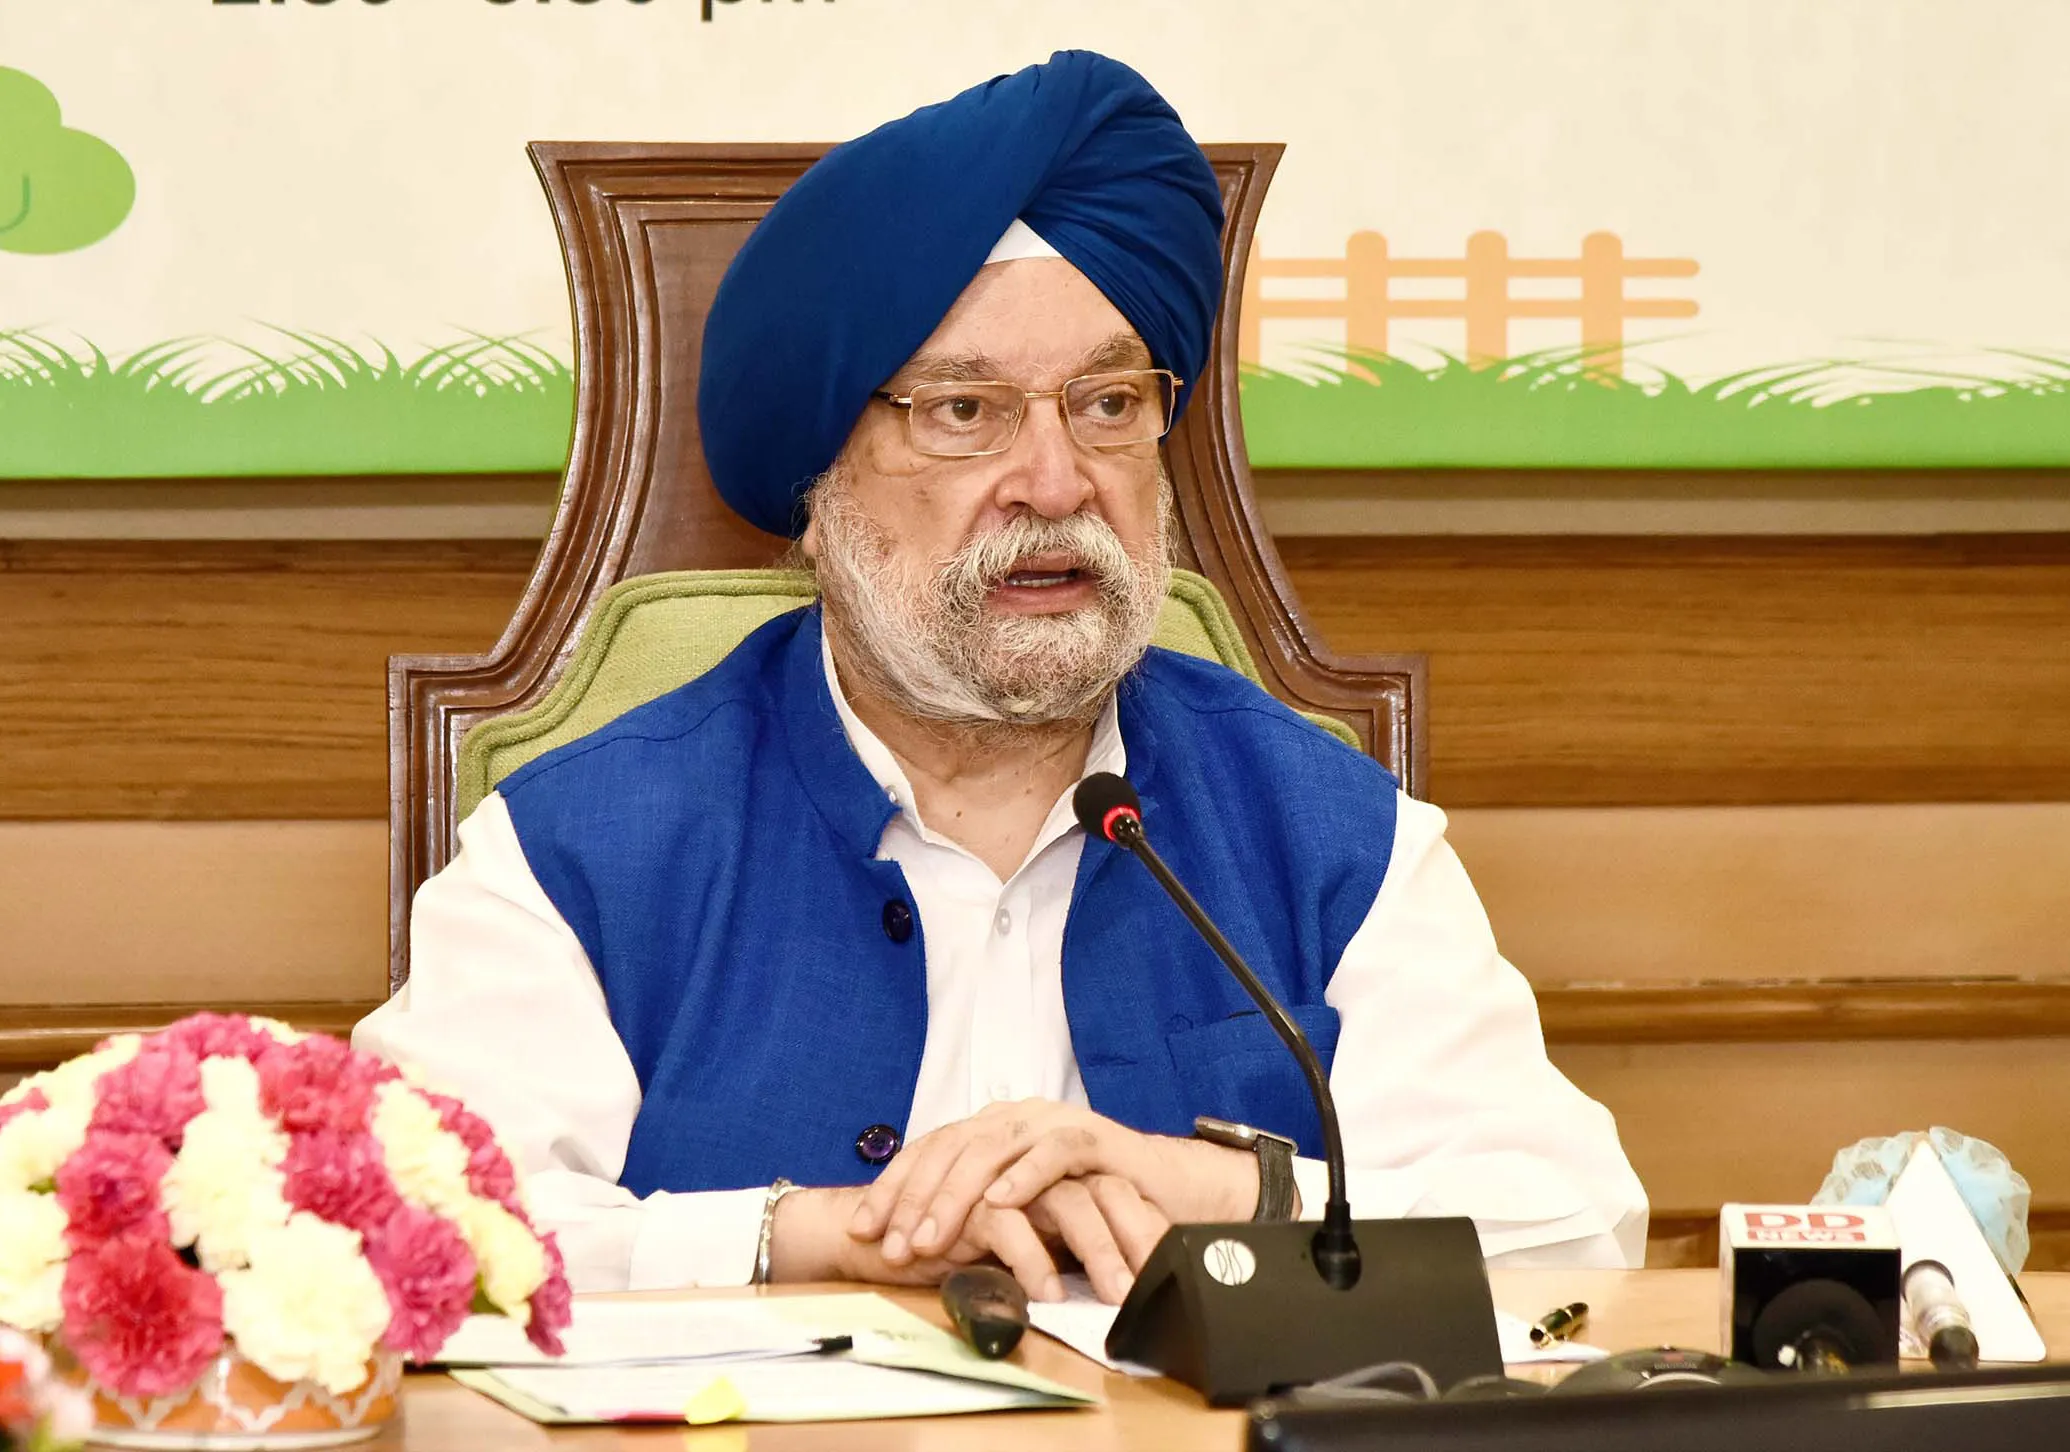 Coronavirus India: Hardeep Singh Puri ruled out calculation of several airline companies which stated normalcy in aviation sector will return in 2023.